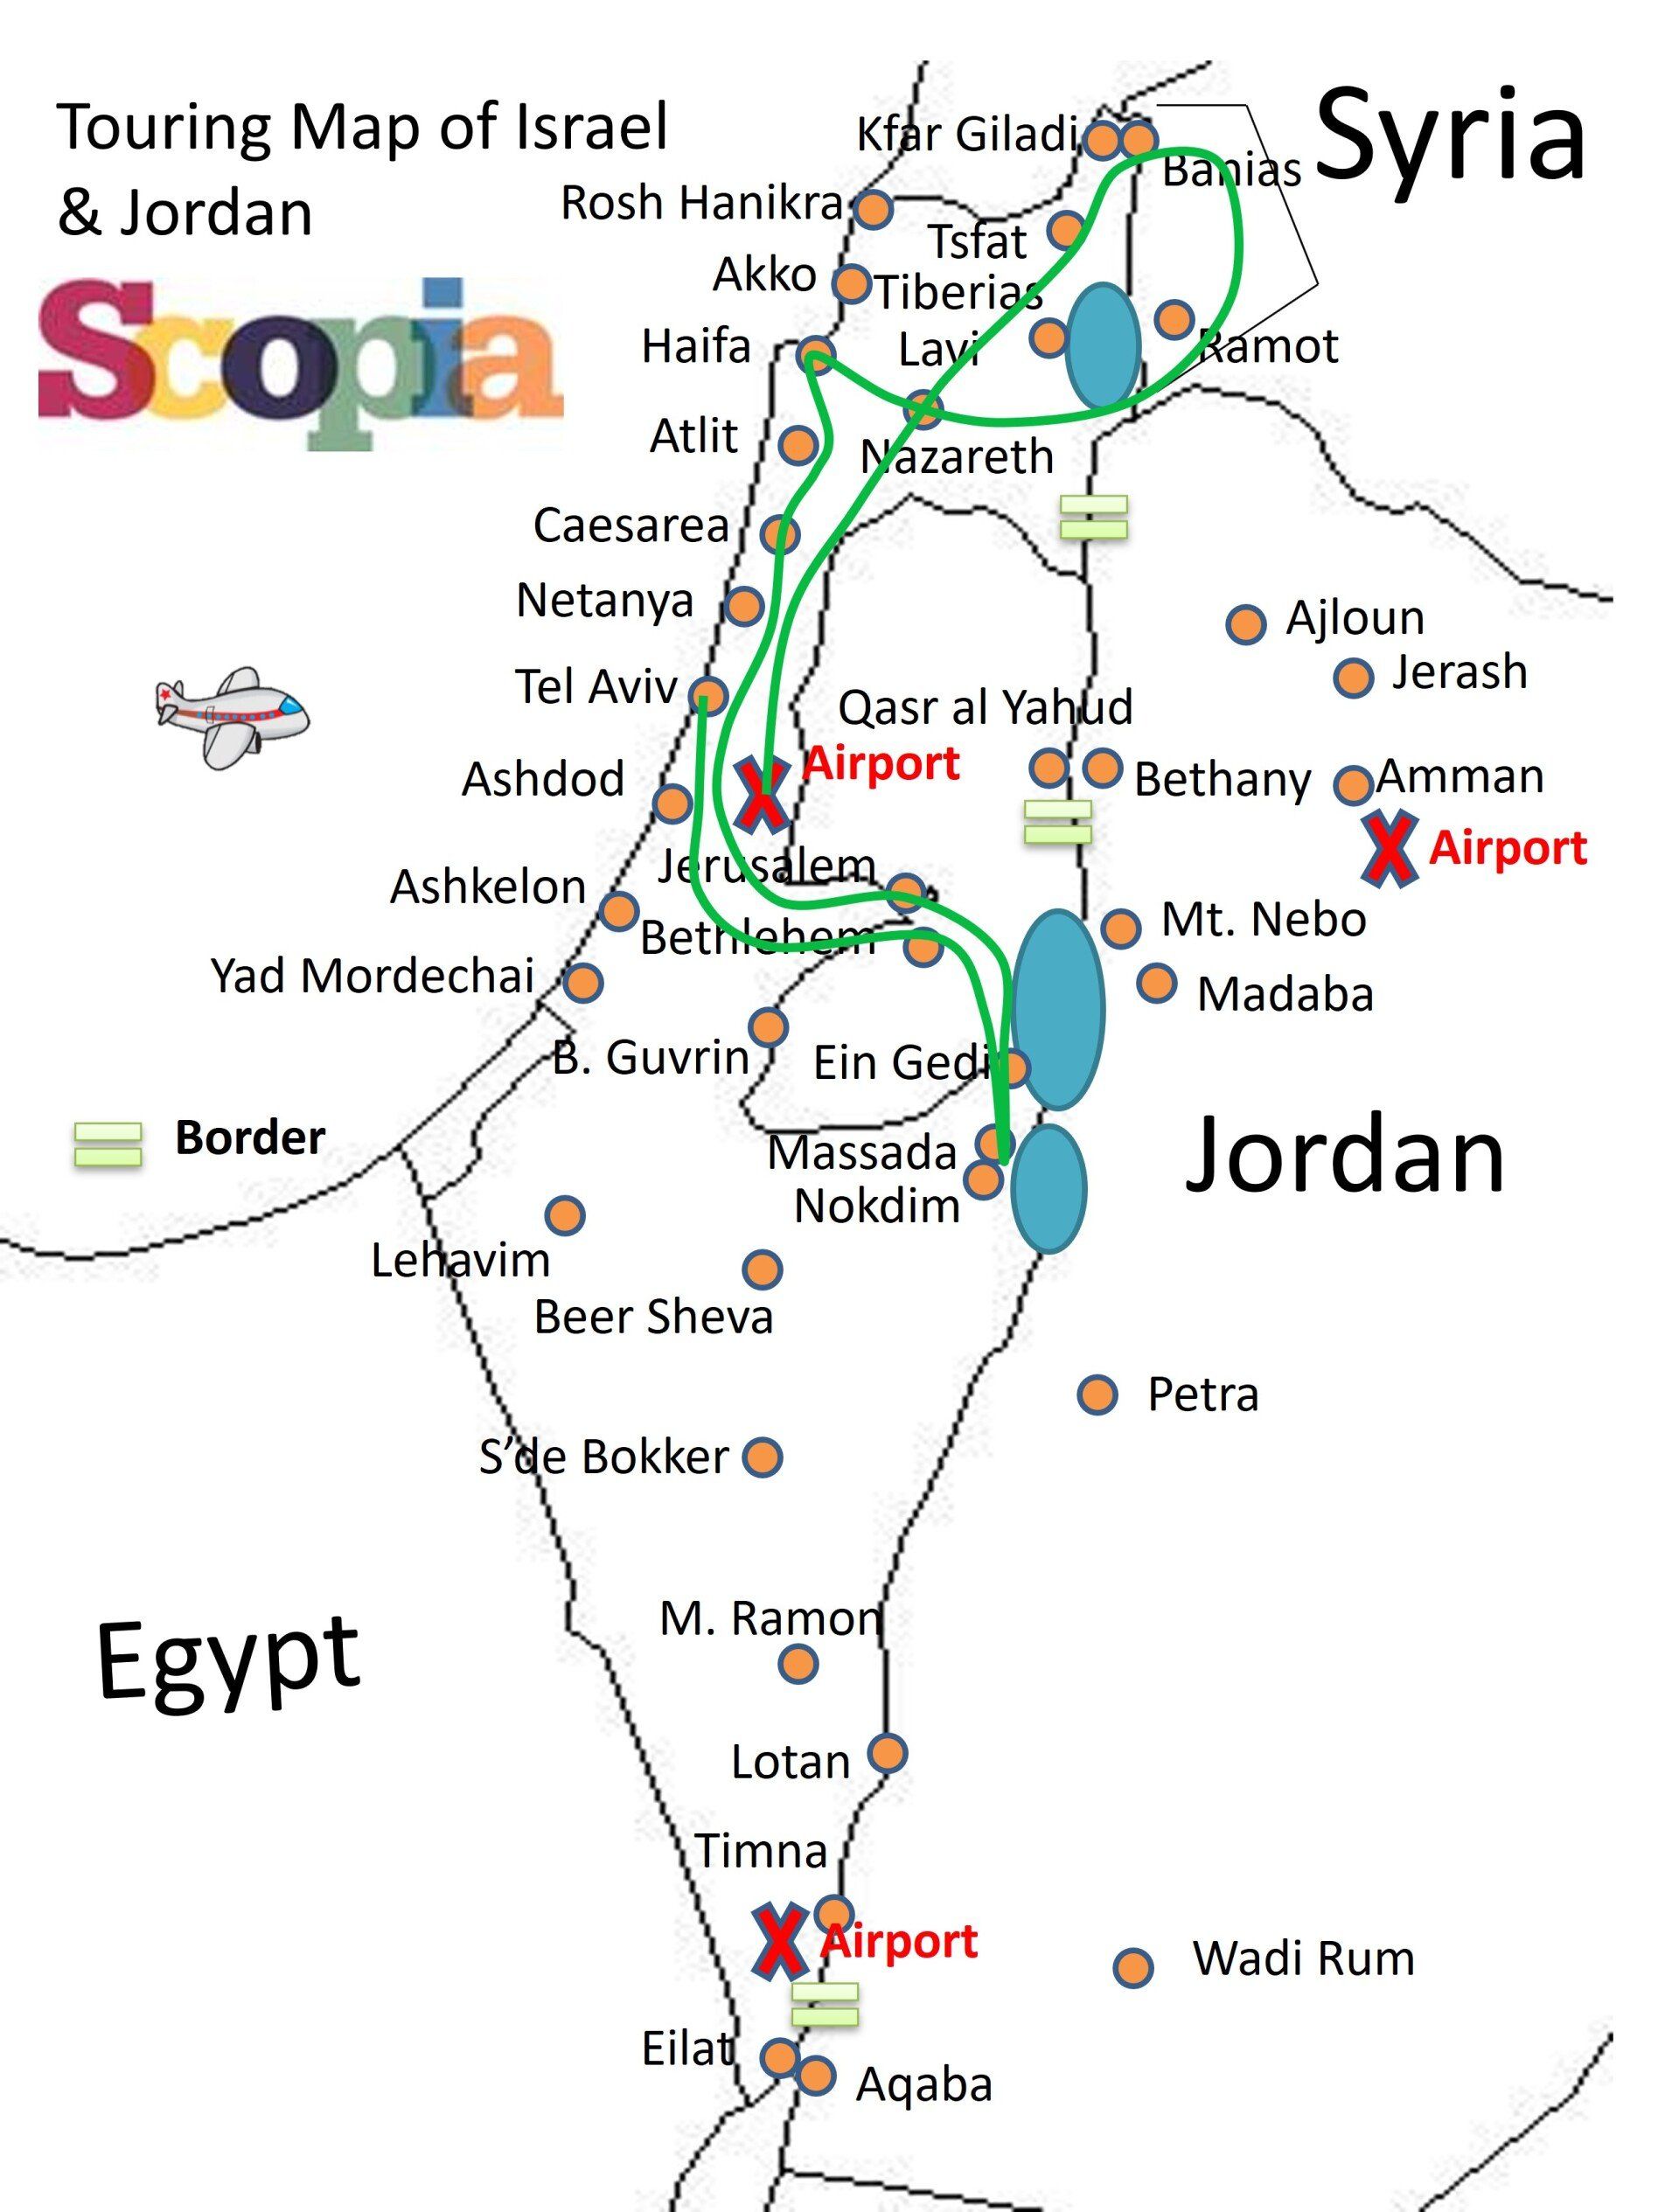 Touring map of Israel